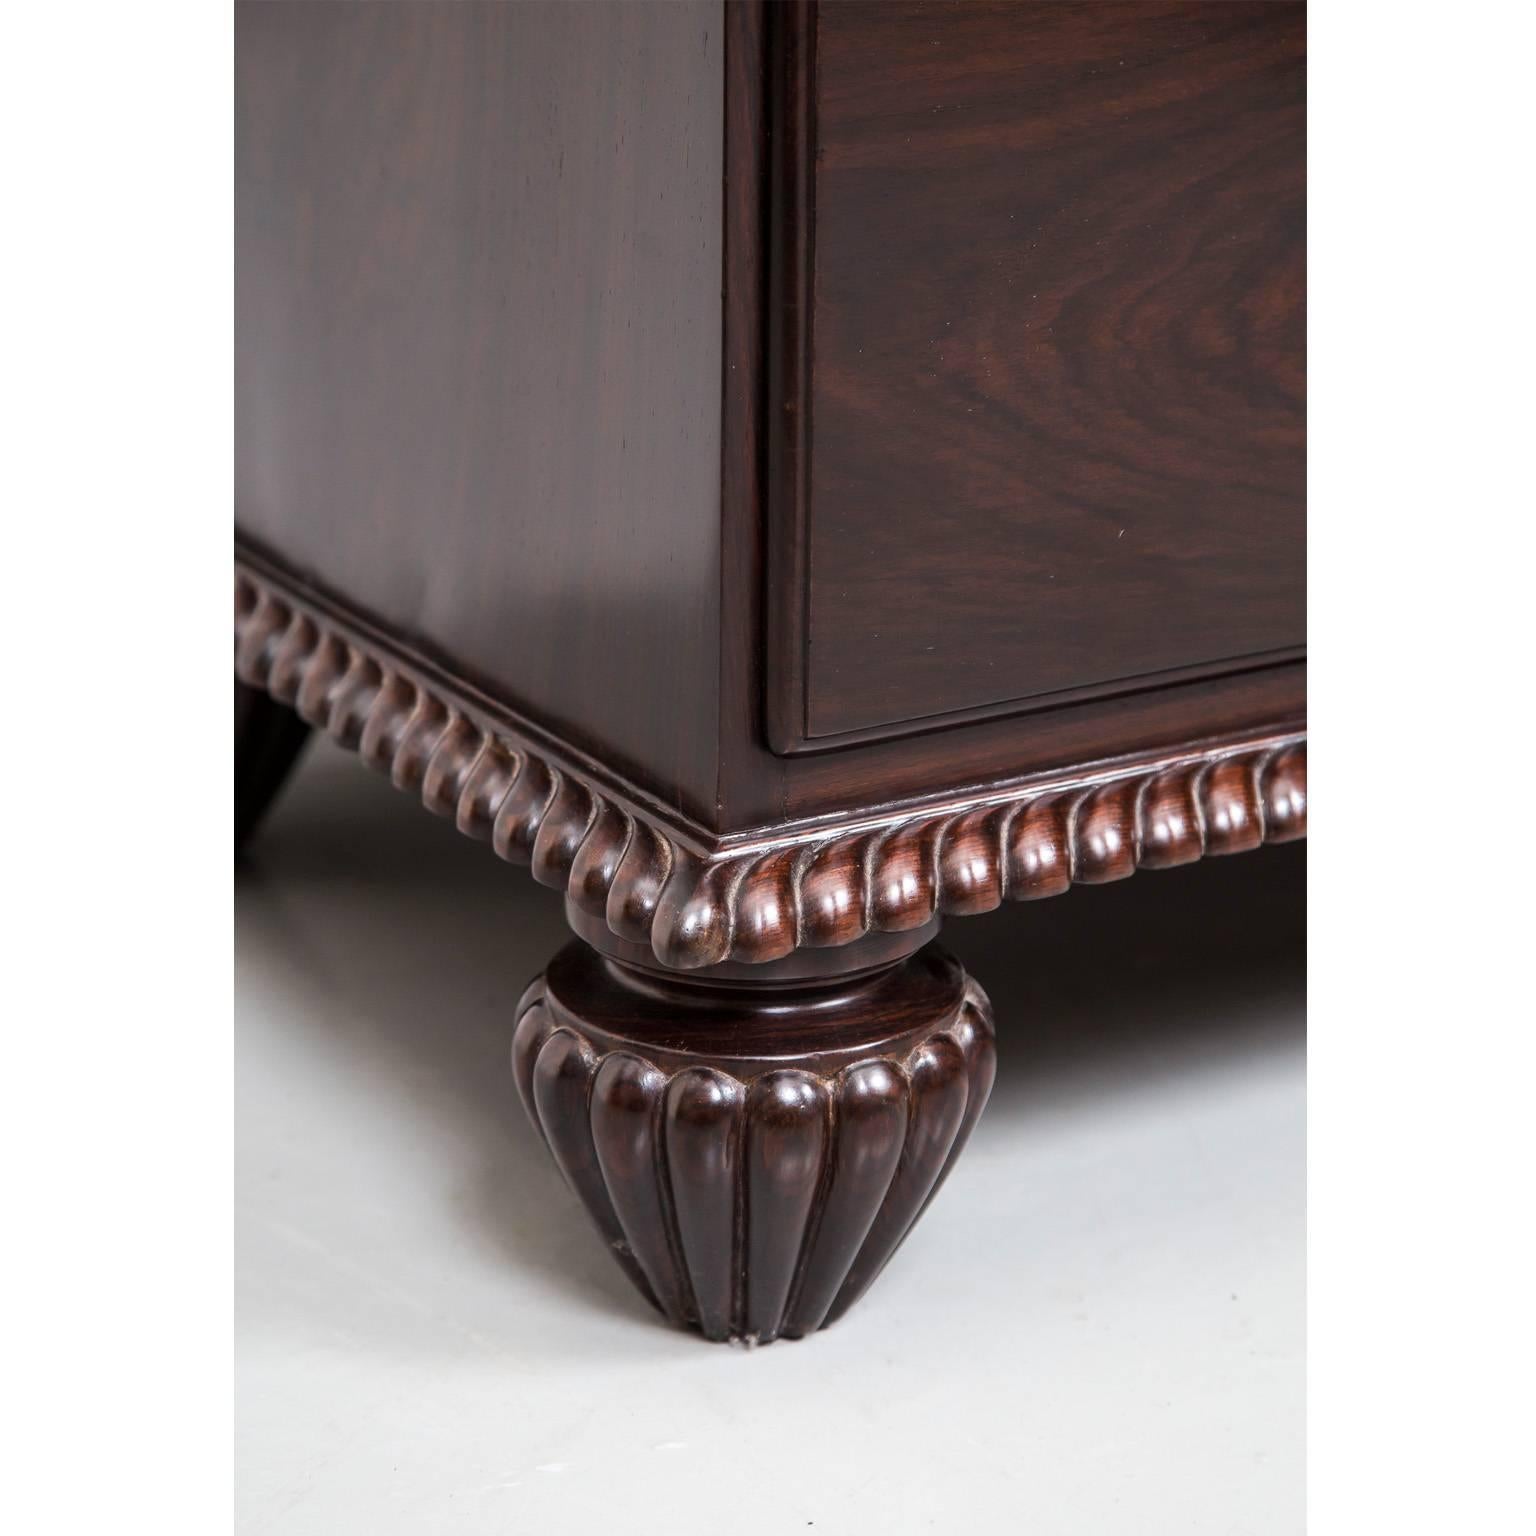 Anglo-Indian or British Colonial Rosewood Cupboard 5